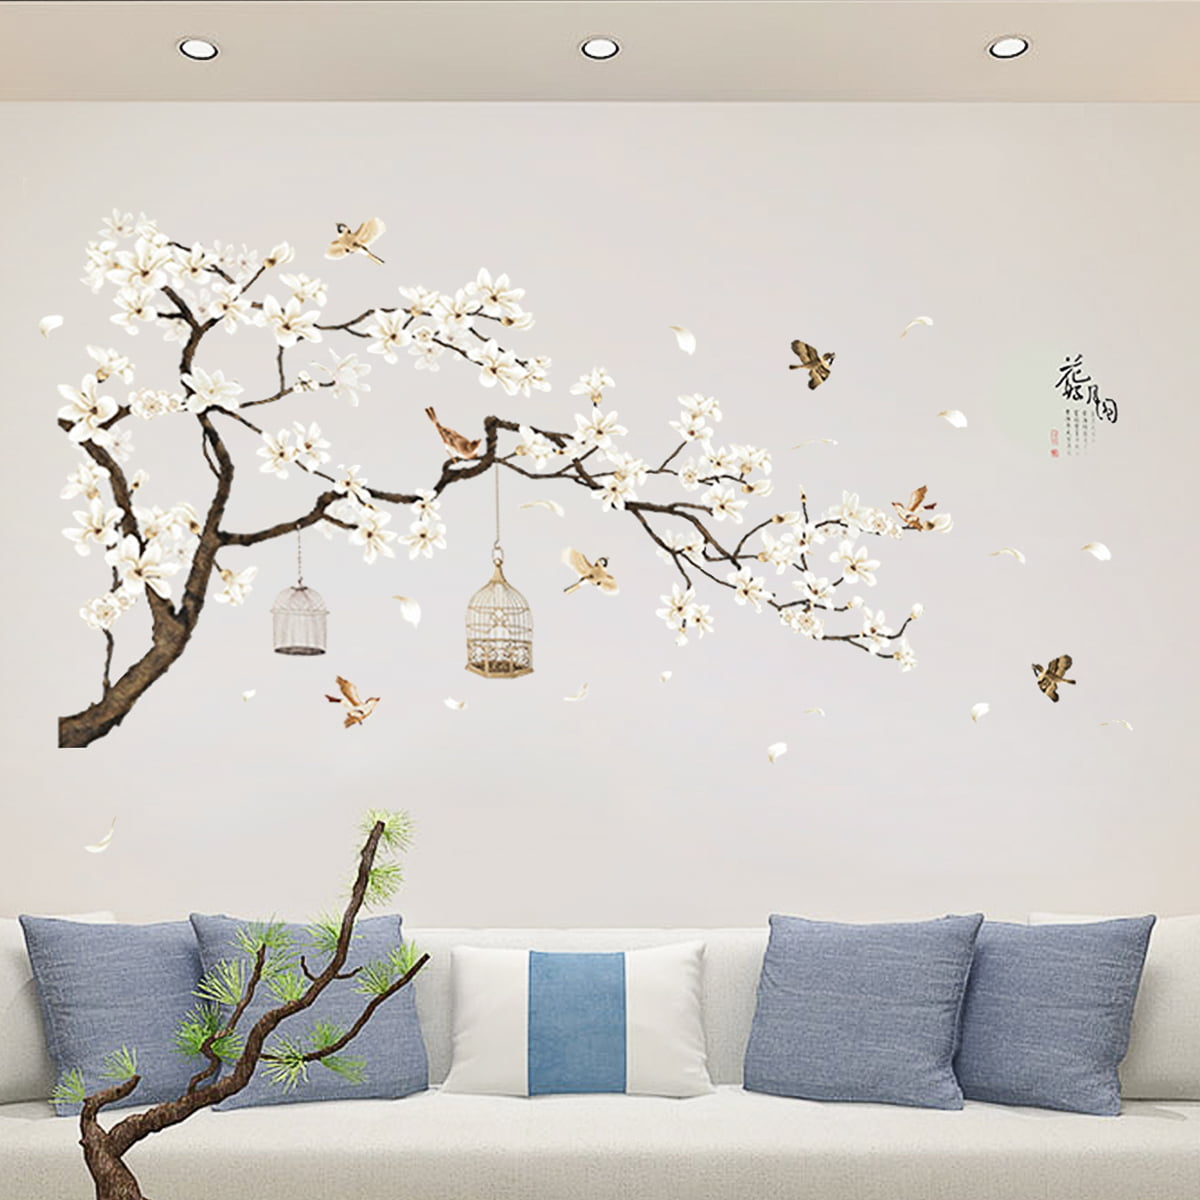 Large Cherry Blossom Flower Birds Tree Wall Stickers Art Decal Home Decor DIY